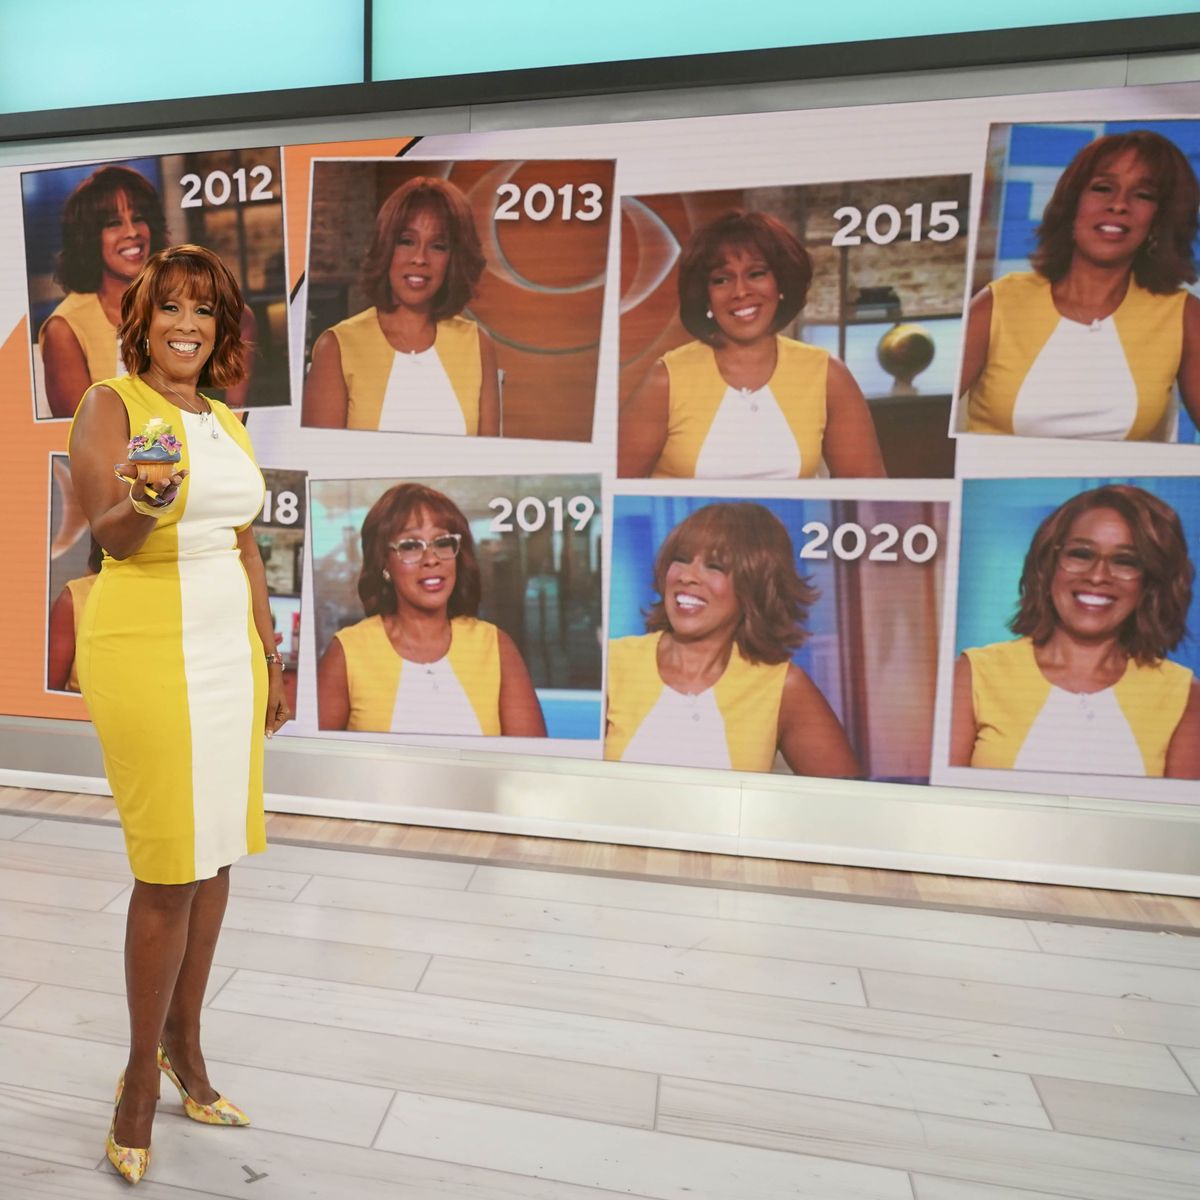 cbs mornings gayle king's 11th year anniversary at cbsco hosts tony dokoupil, gayle king, nate burleson photo gail schulmancbs news ©2023 cbs broadcasting, inc all rights reserved